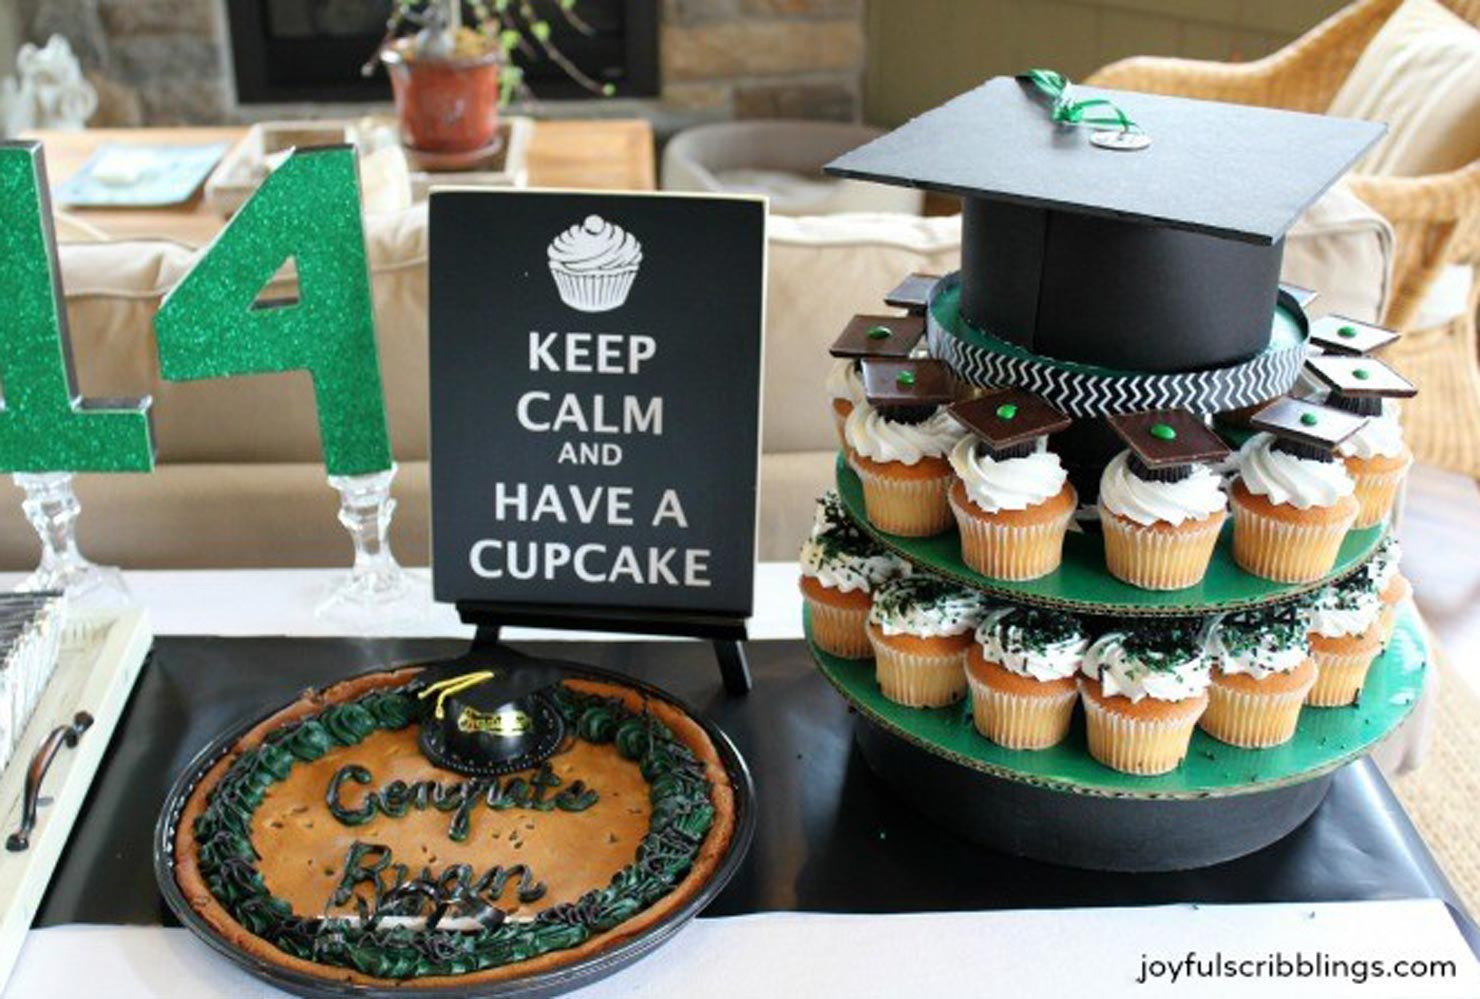 Cupcake Decorating Ideas Graduation Party
 90 Graduation Party Ideas for High School & College 2019